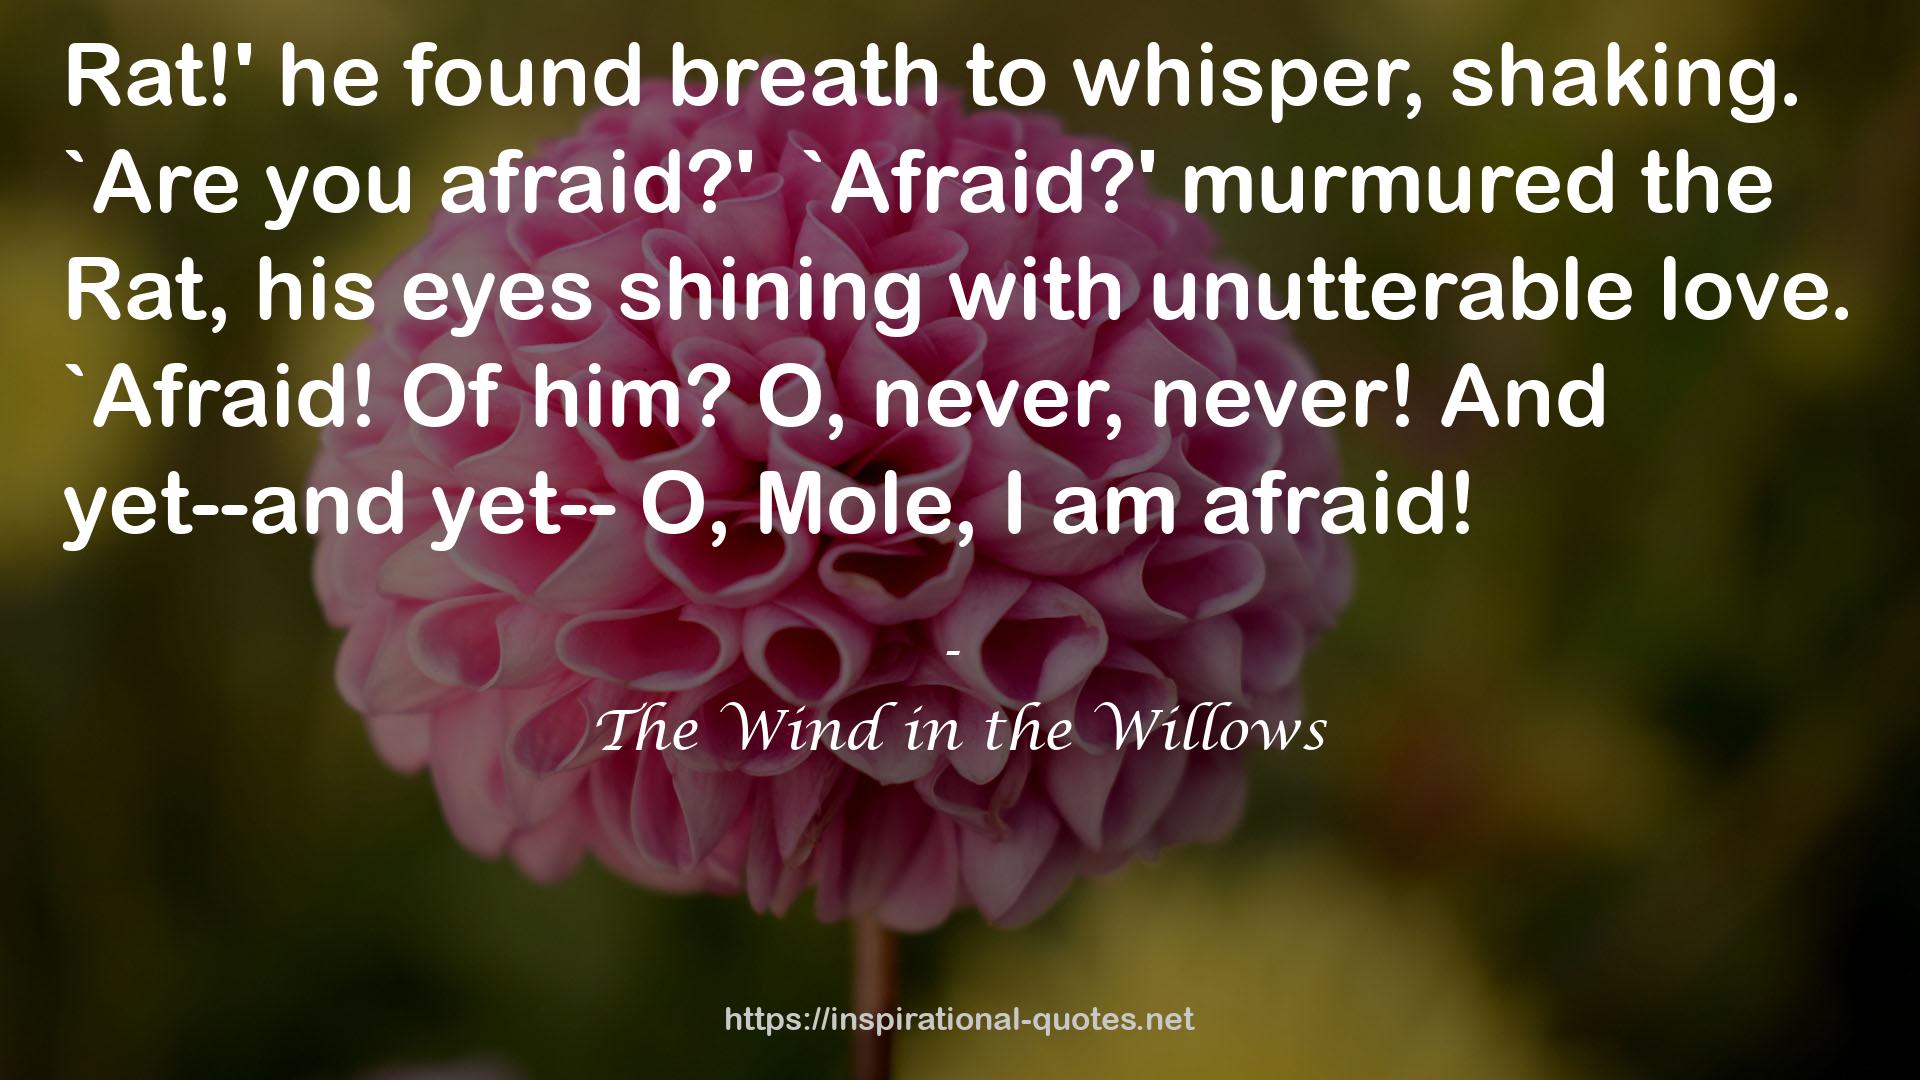 The Wind in the Willows QUOTES